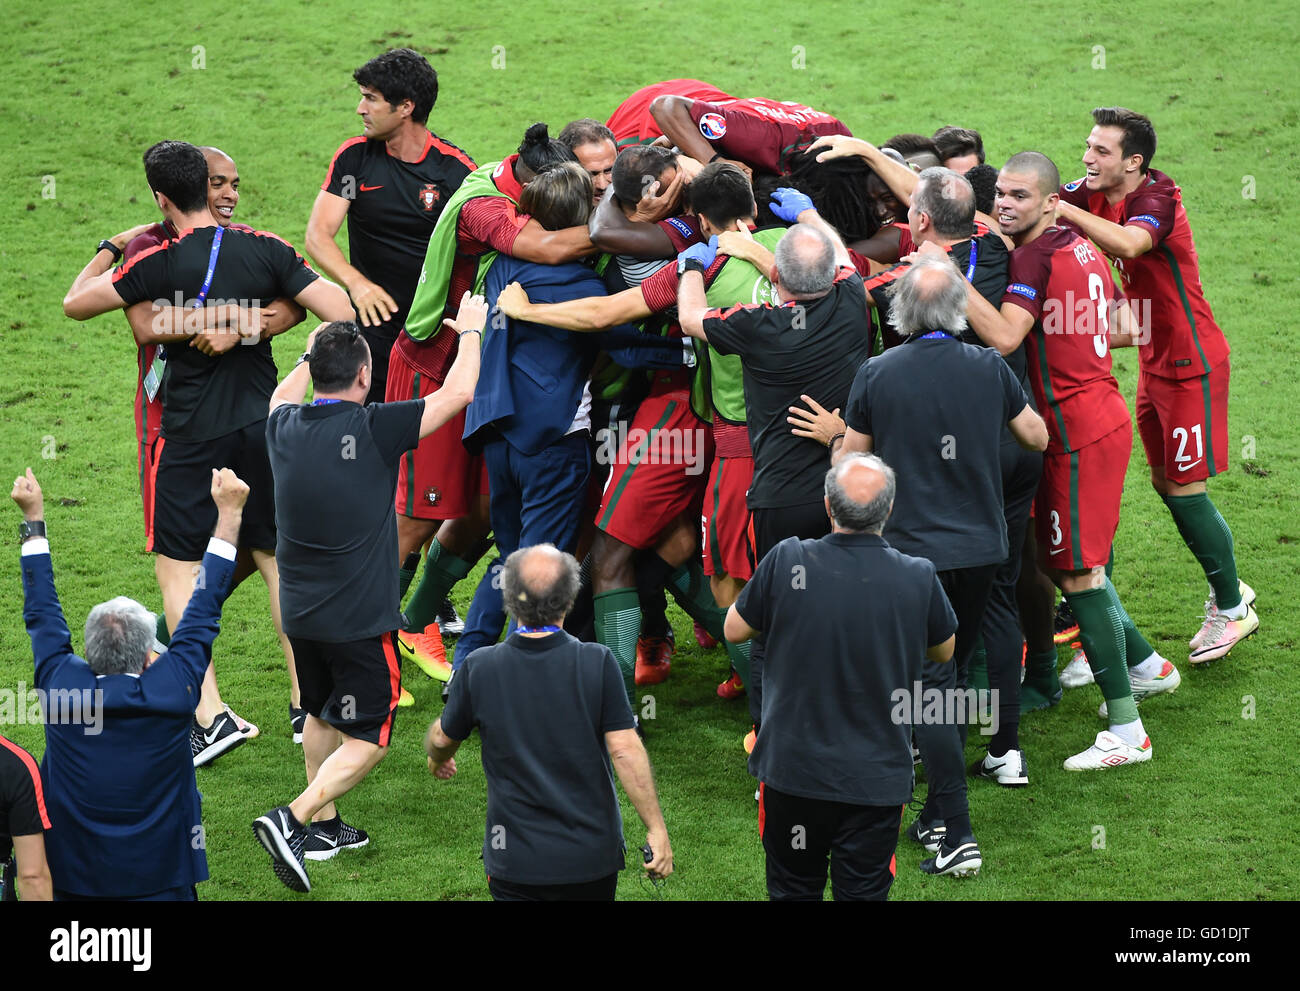 Portugal players celebrate after Eder (obscured) scores his side's first goal of the game during the UEFA Euro 2016 Final at the Stade de France, Paris. PRESS ASSOCIATION Photo. Picture date: Sunday July 10, 2016. See PA story SOCCER Final. Photo credit should read: Joe Giddens/PA Wire. RESTRICTIONS: Use subject to restrictions. Editorial use only. Book and magazine sales permitted providing not solely devoted to any one team/player/match. No commercial use. Call +44 (0)1158 447447 for further information. Stock Photo